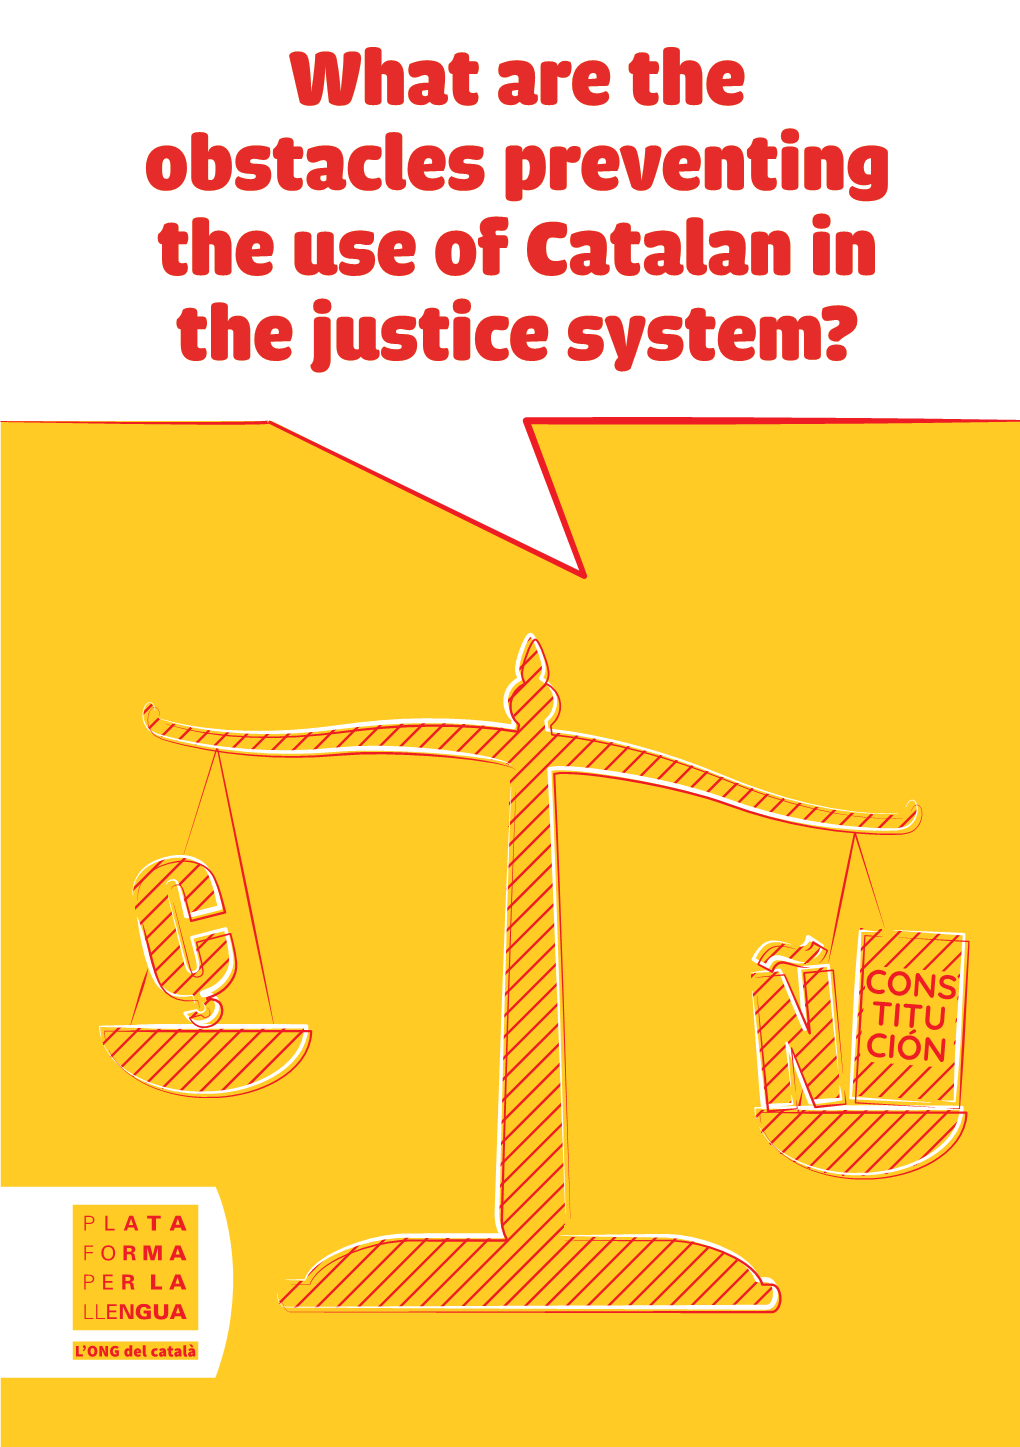 What Are the Obstacles Preventing the Use of Catalan in the Justice System?